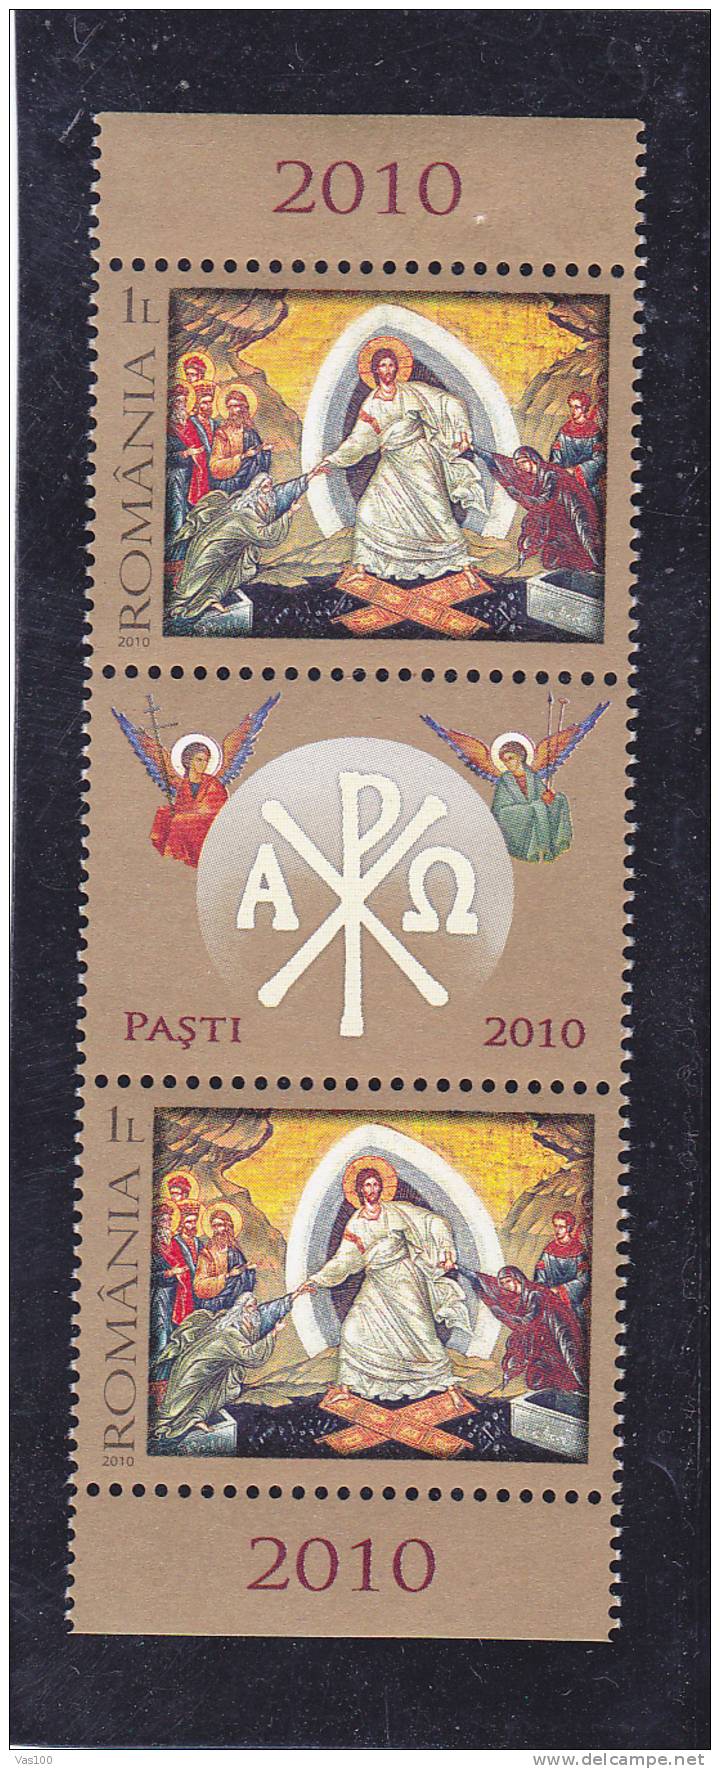 Easter,Pâques , 2010 MNH ** Stamps In Pair + Labels !,Romania. - Pâques